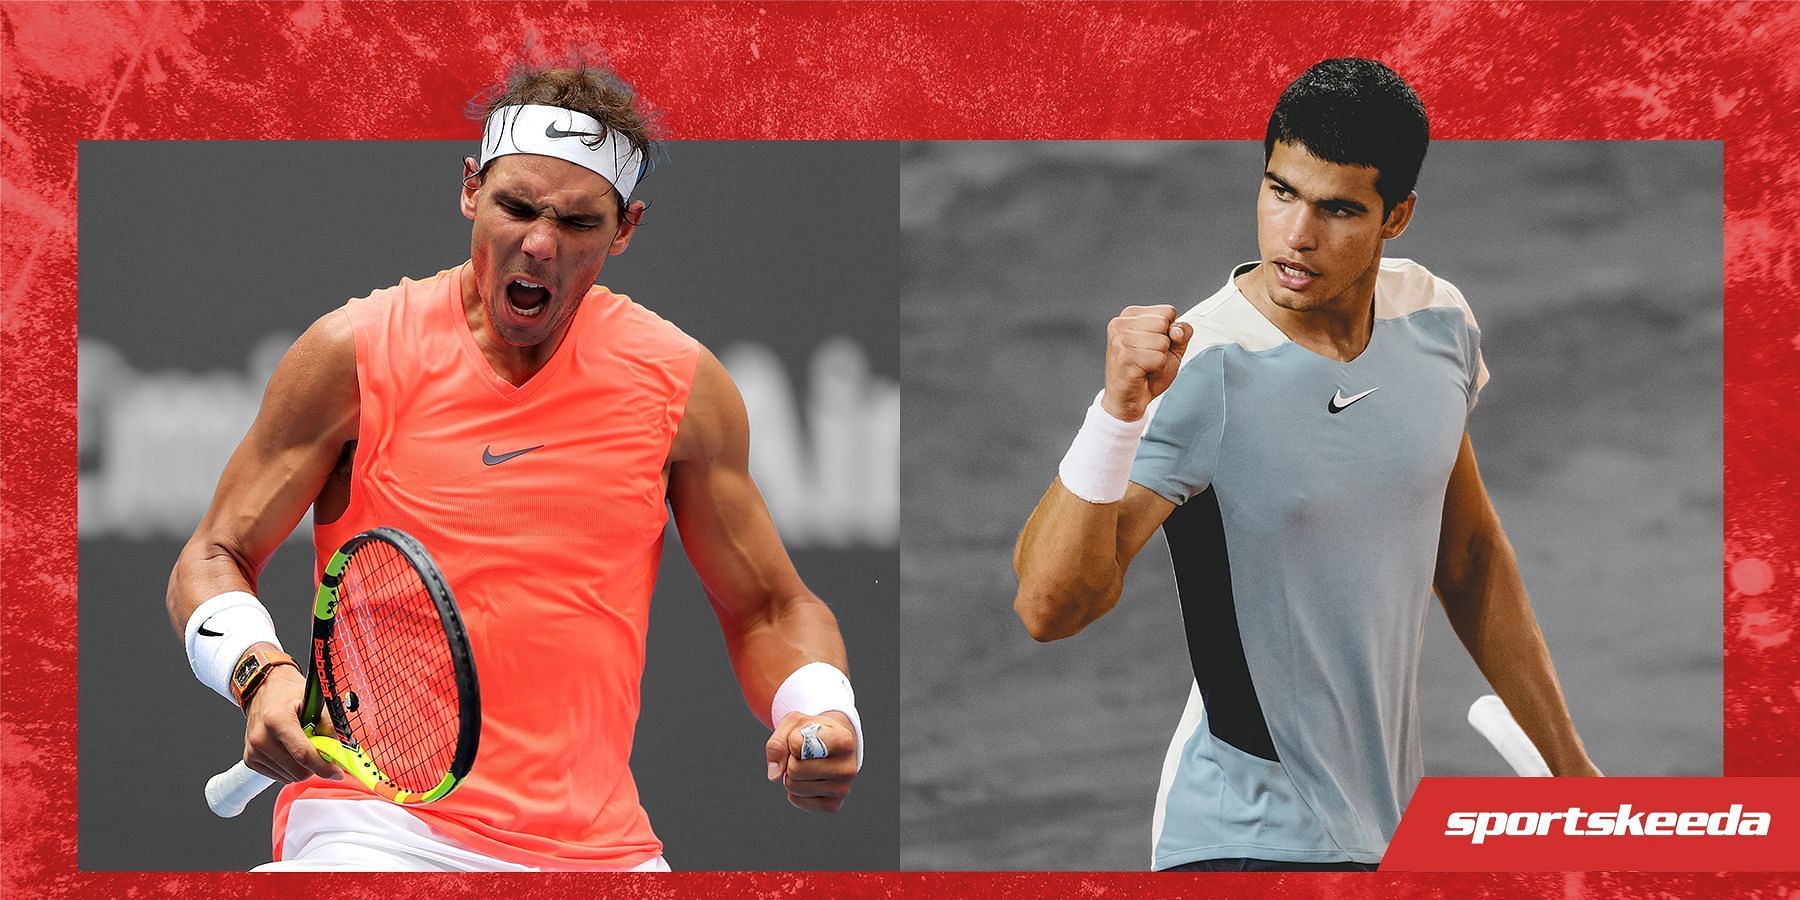 Rafael Nadal and Carlos Alcaraz are among the players to look out for during the US Open Series